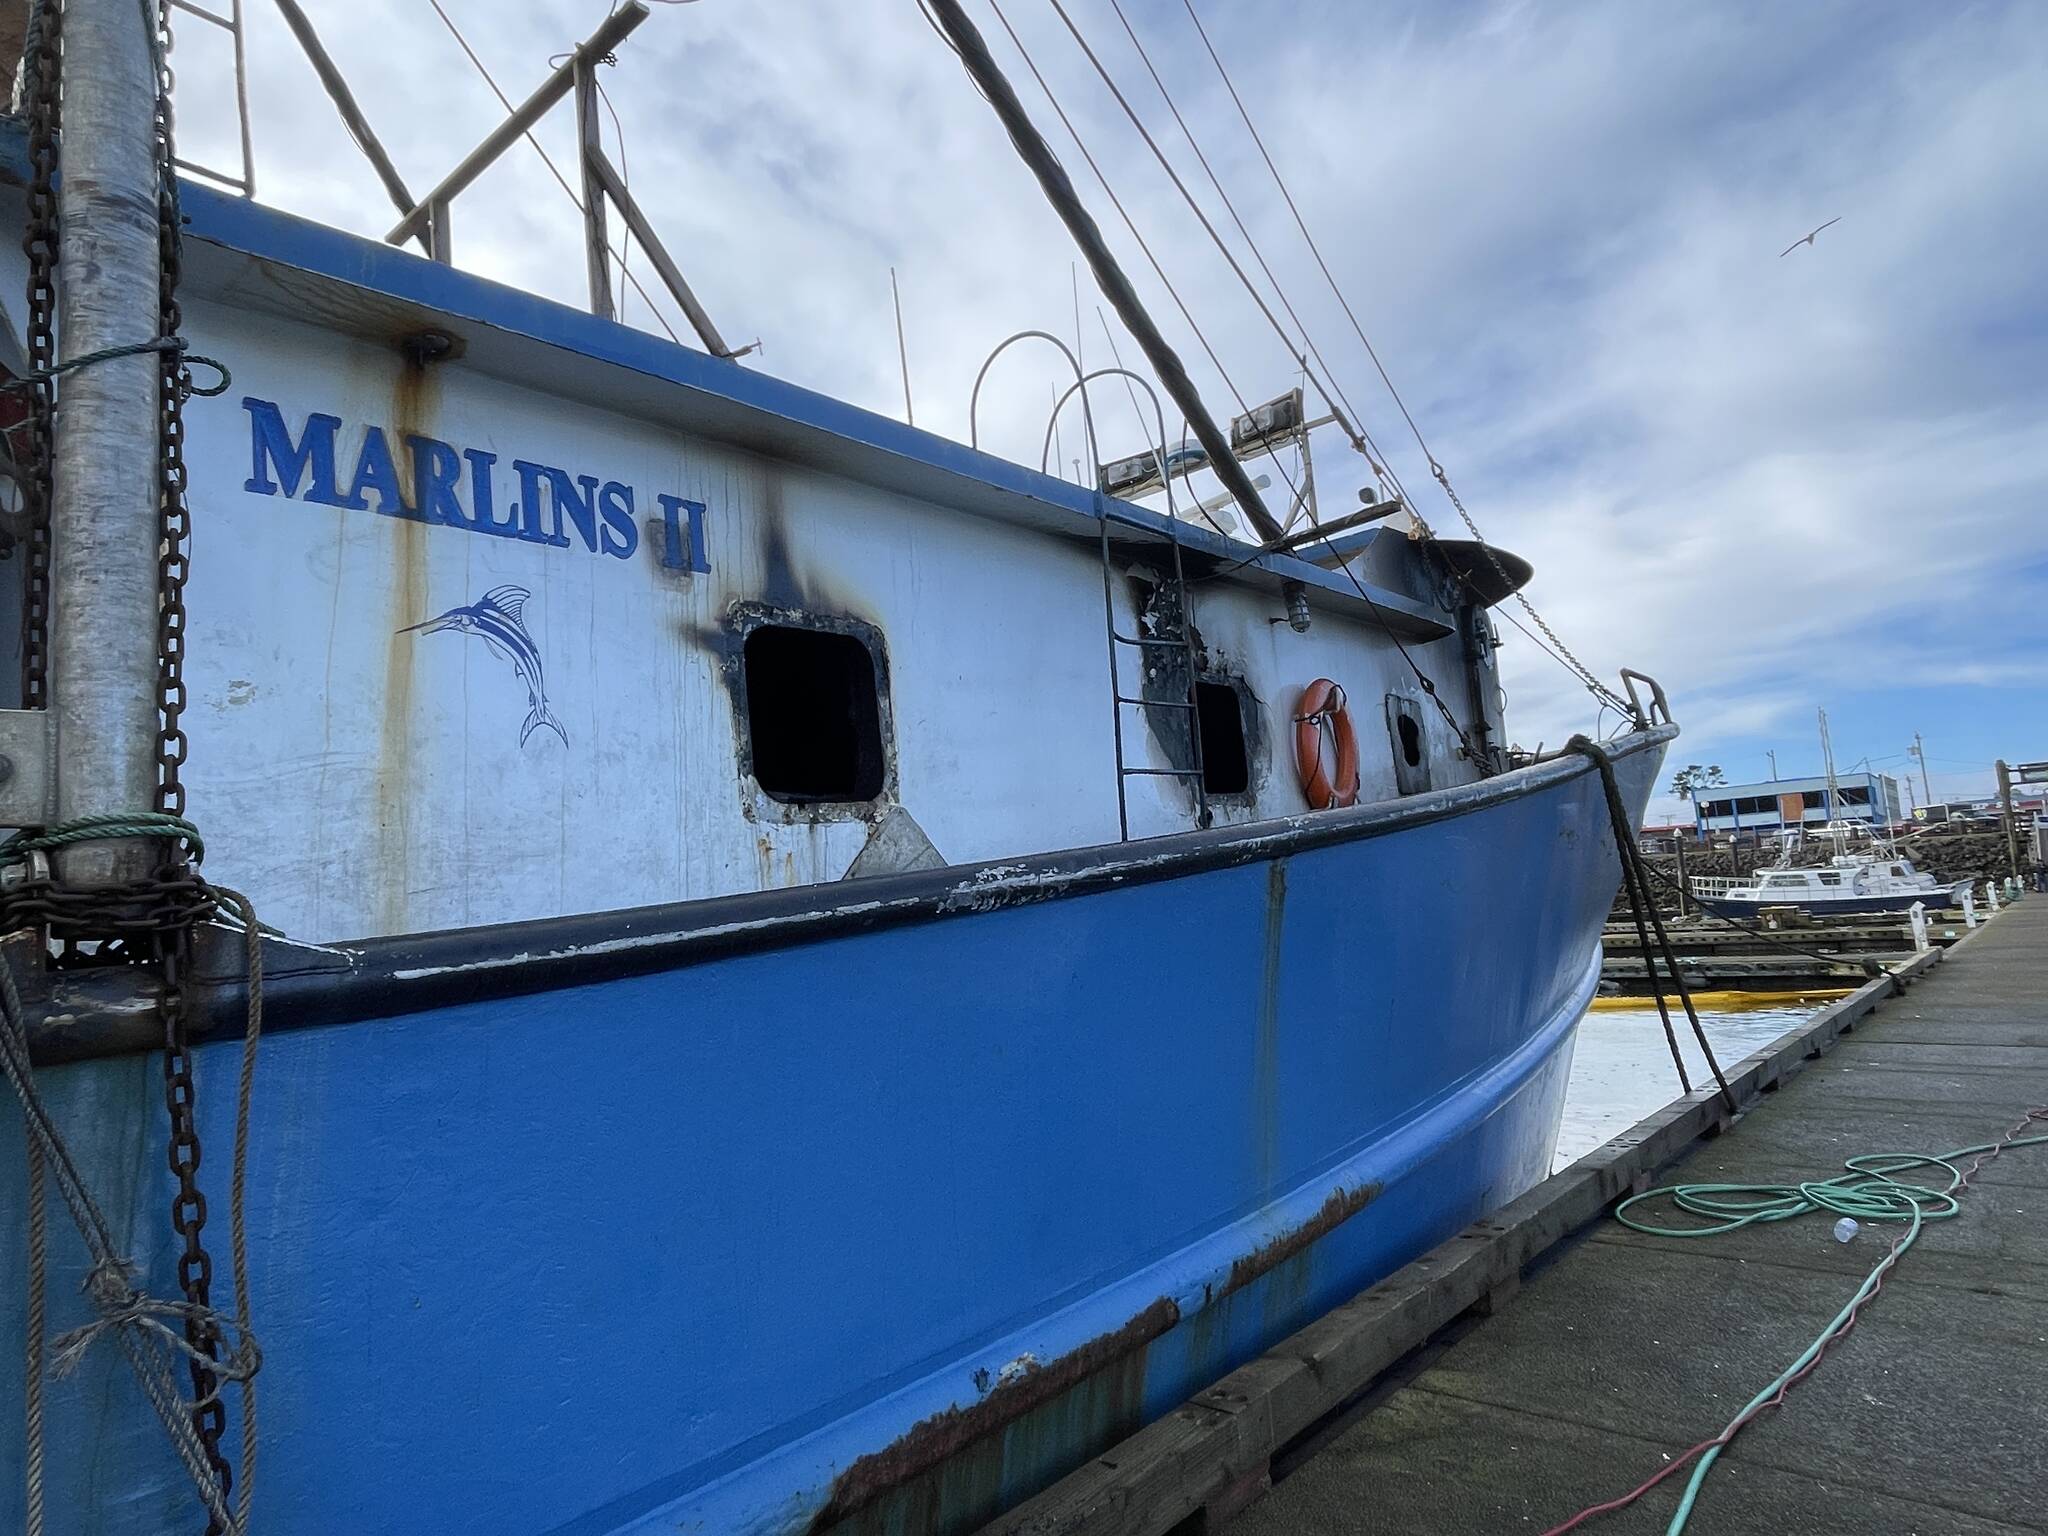 Damage caused by a Thursday fire is visible on the rising from the windows of a fishing vessel moored in the Westport Marina. (Michael S. Lockett / The Daily World)